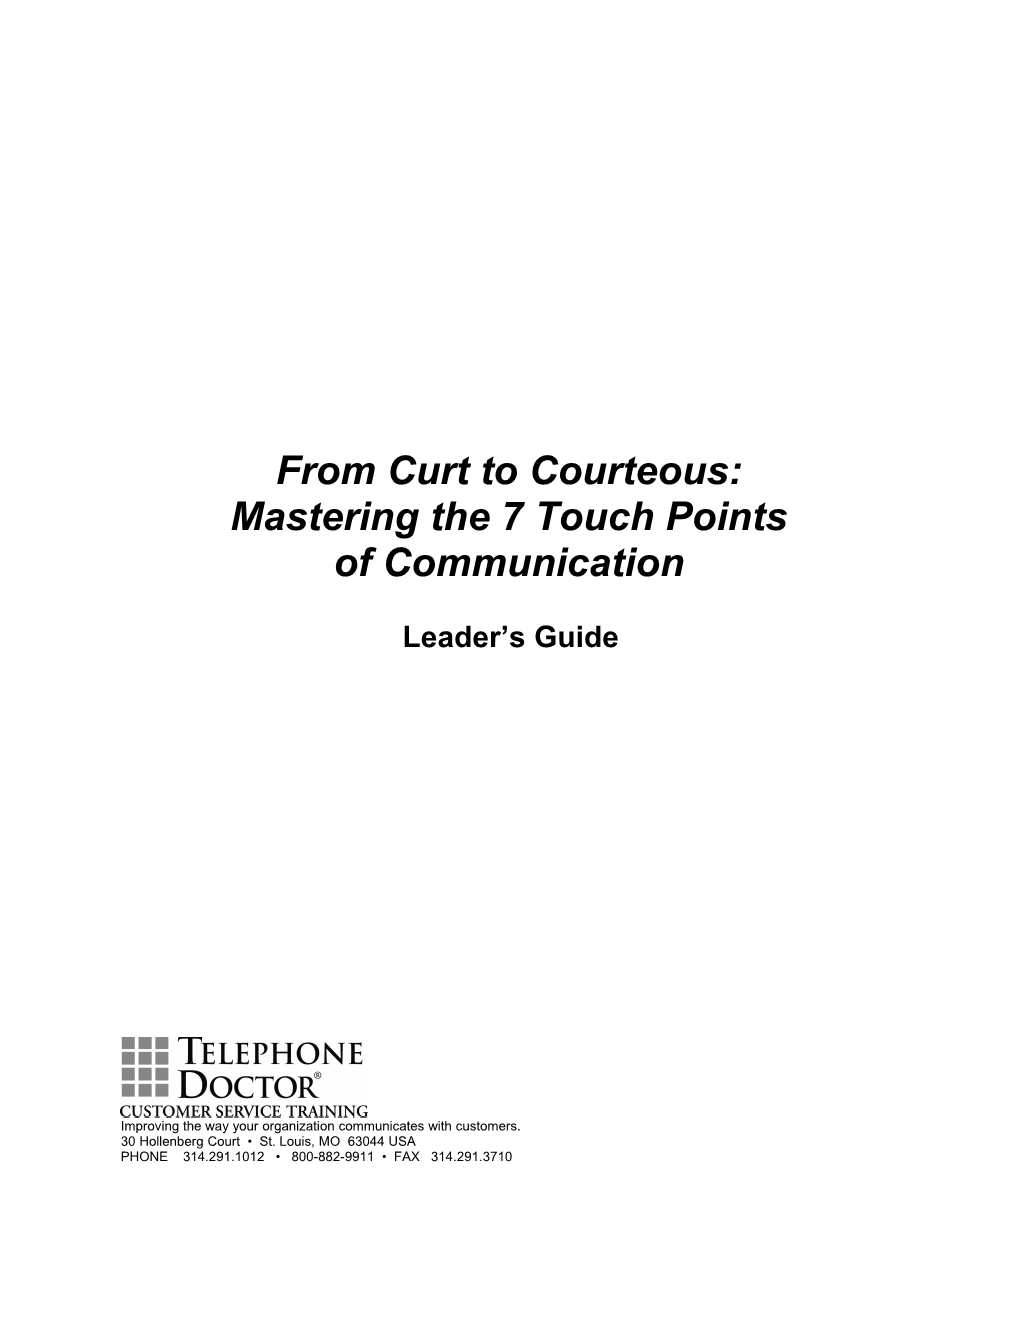 Curt to Courteous: 7 Touch Points LG